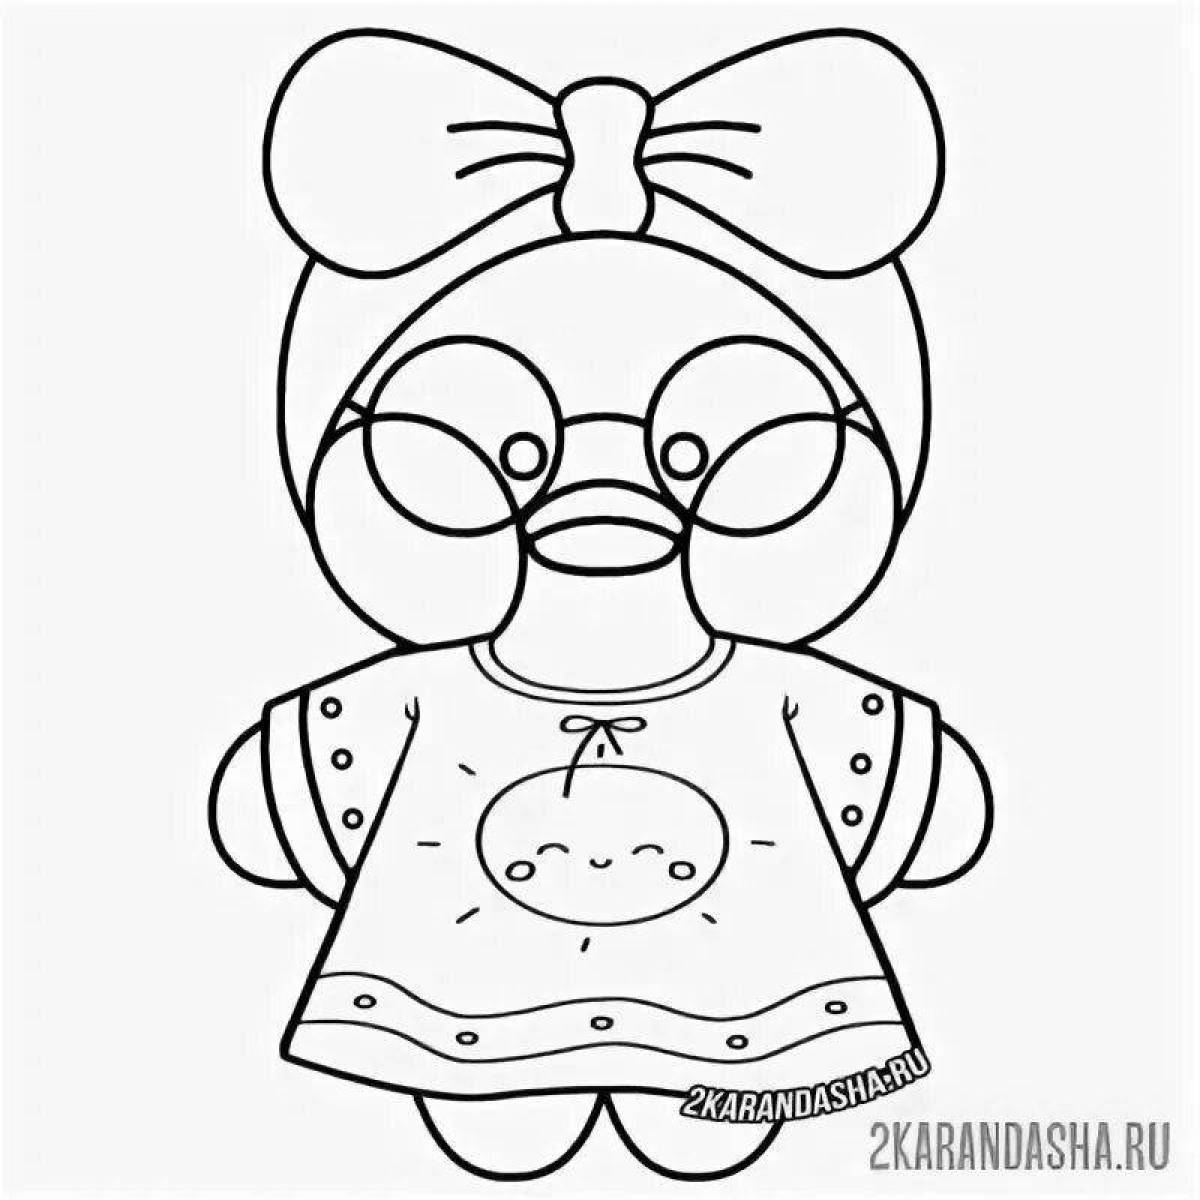 Delightful lalaphan duck coloring book